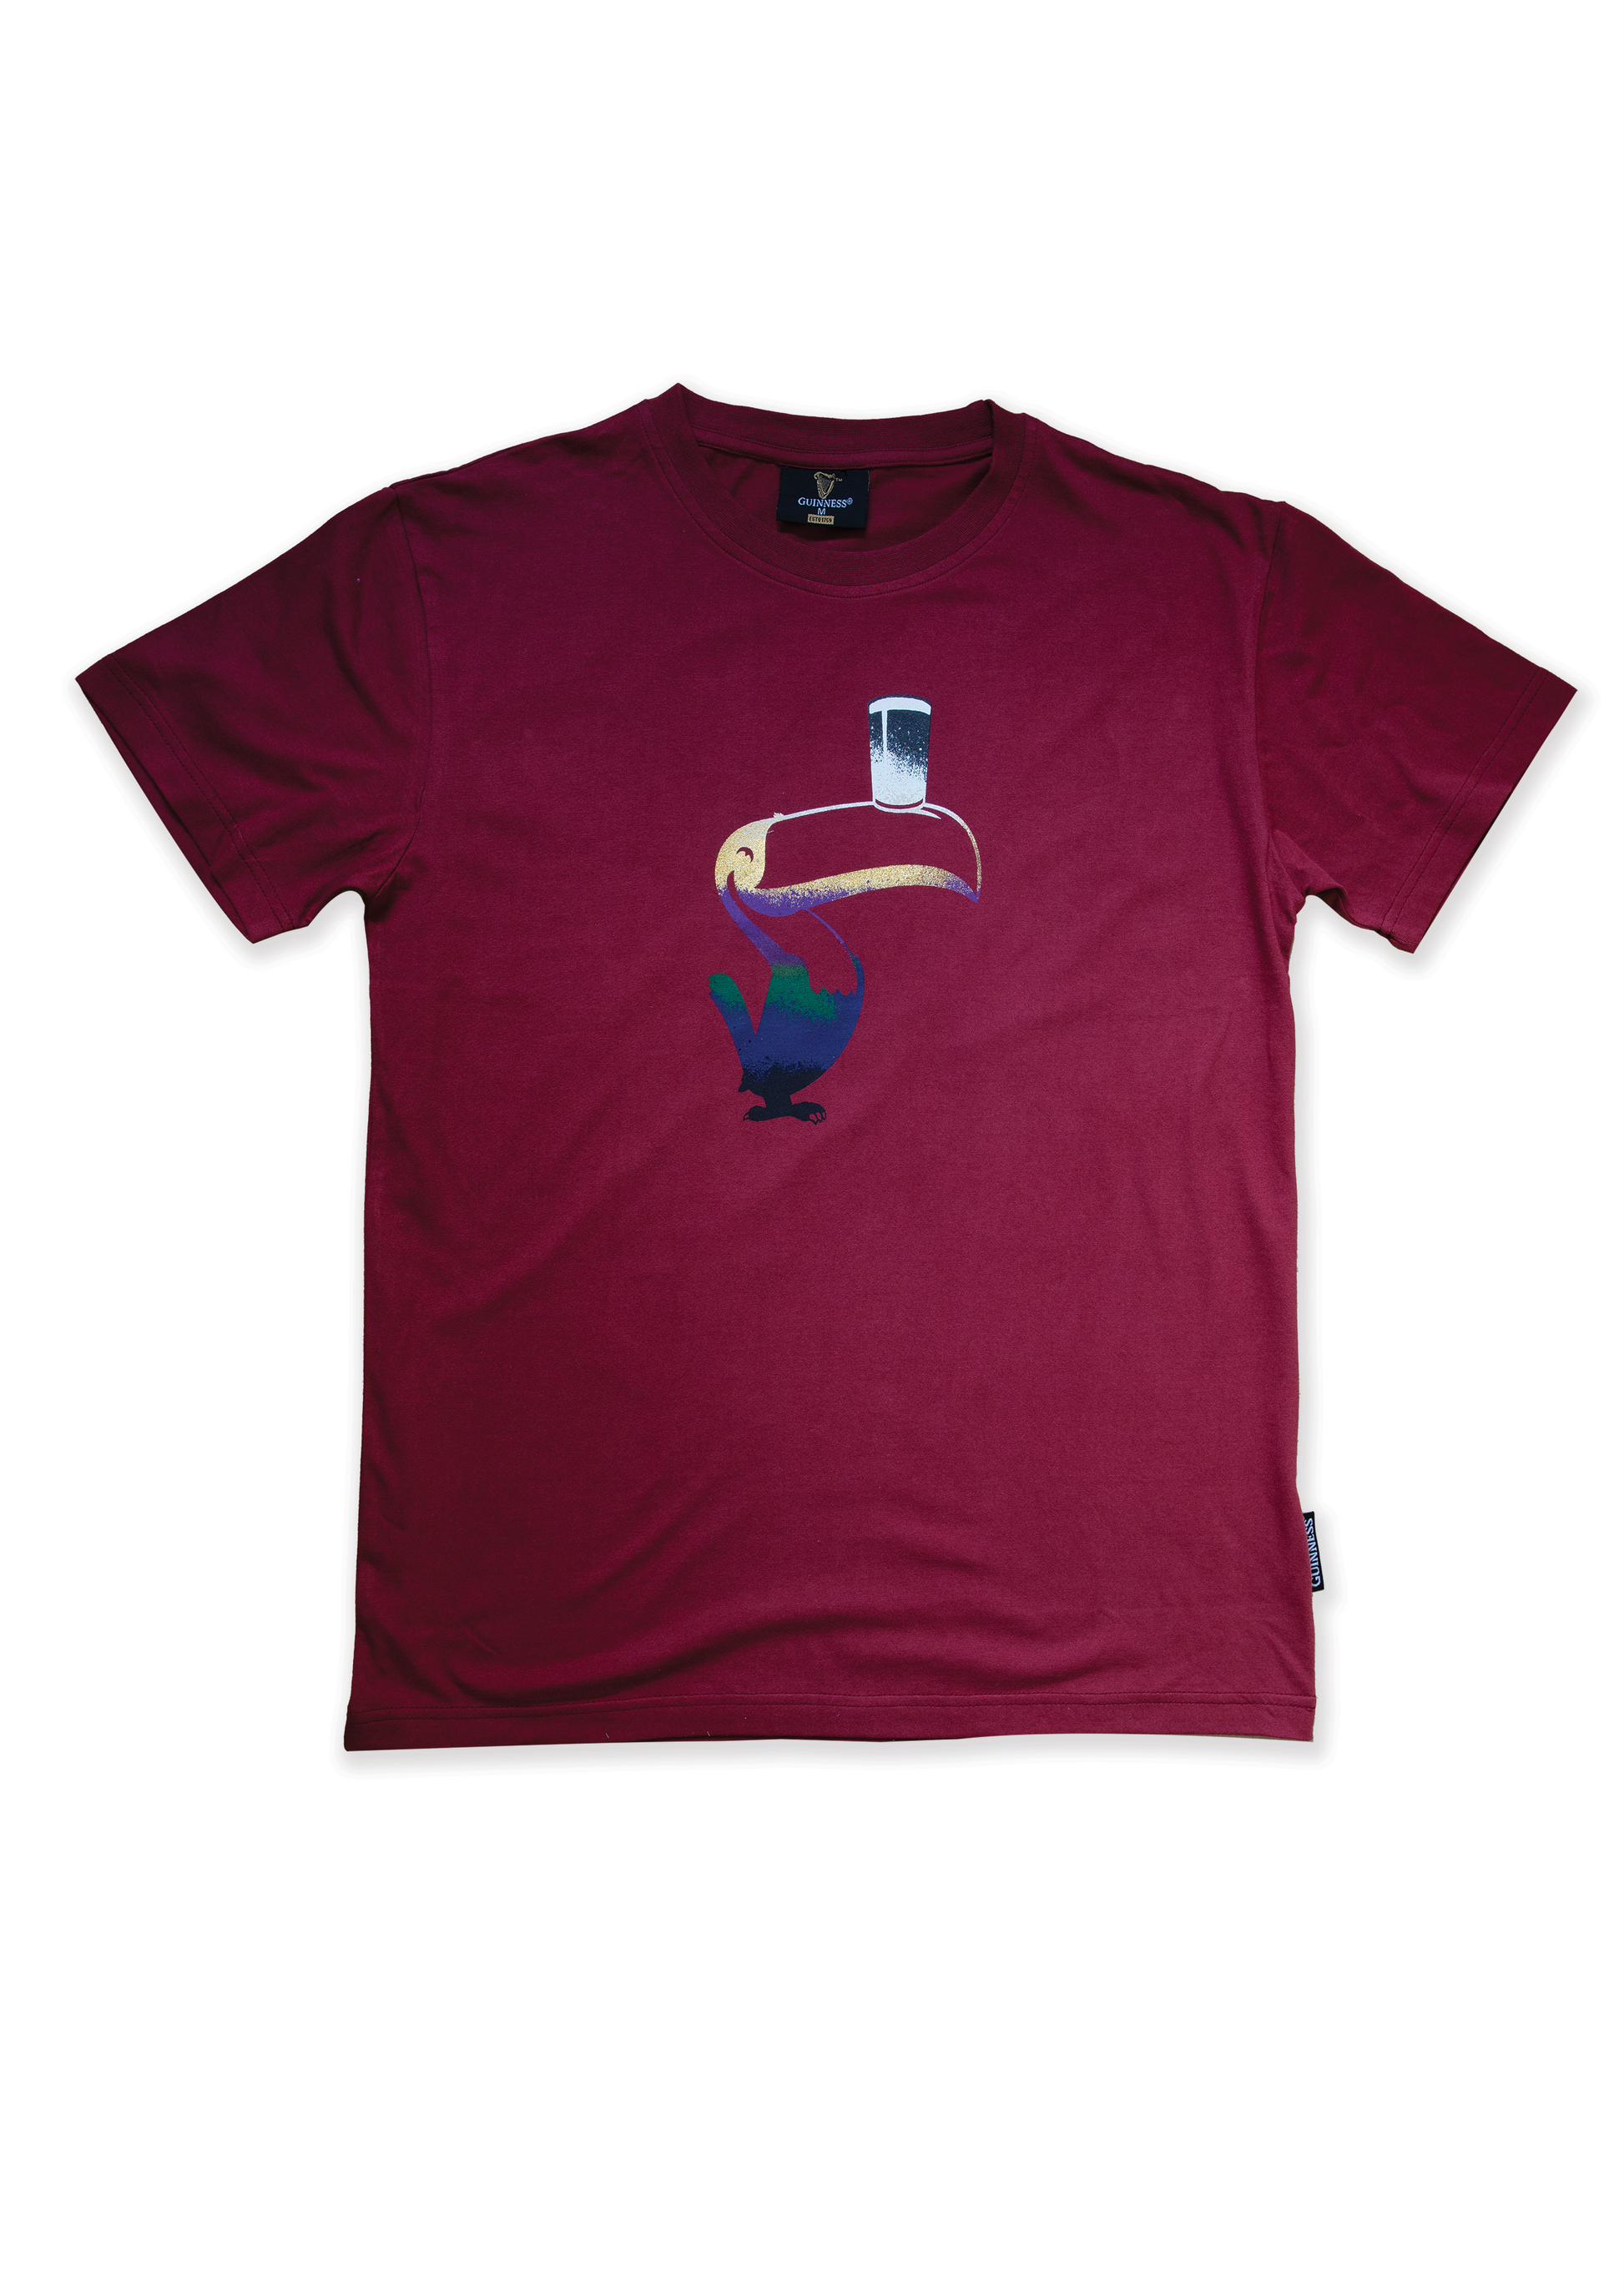 A Guinness Liquid Toucan Tee - Red with an image of a bird on it.